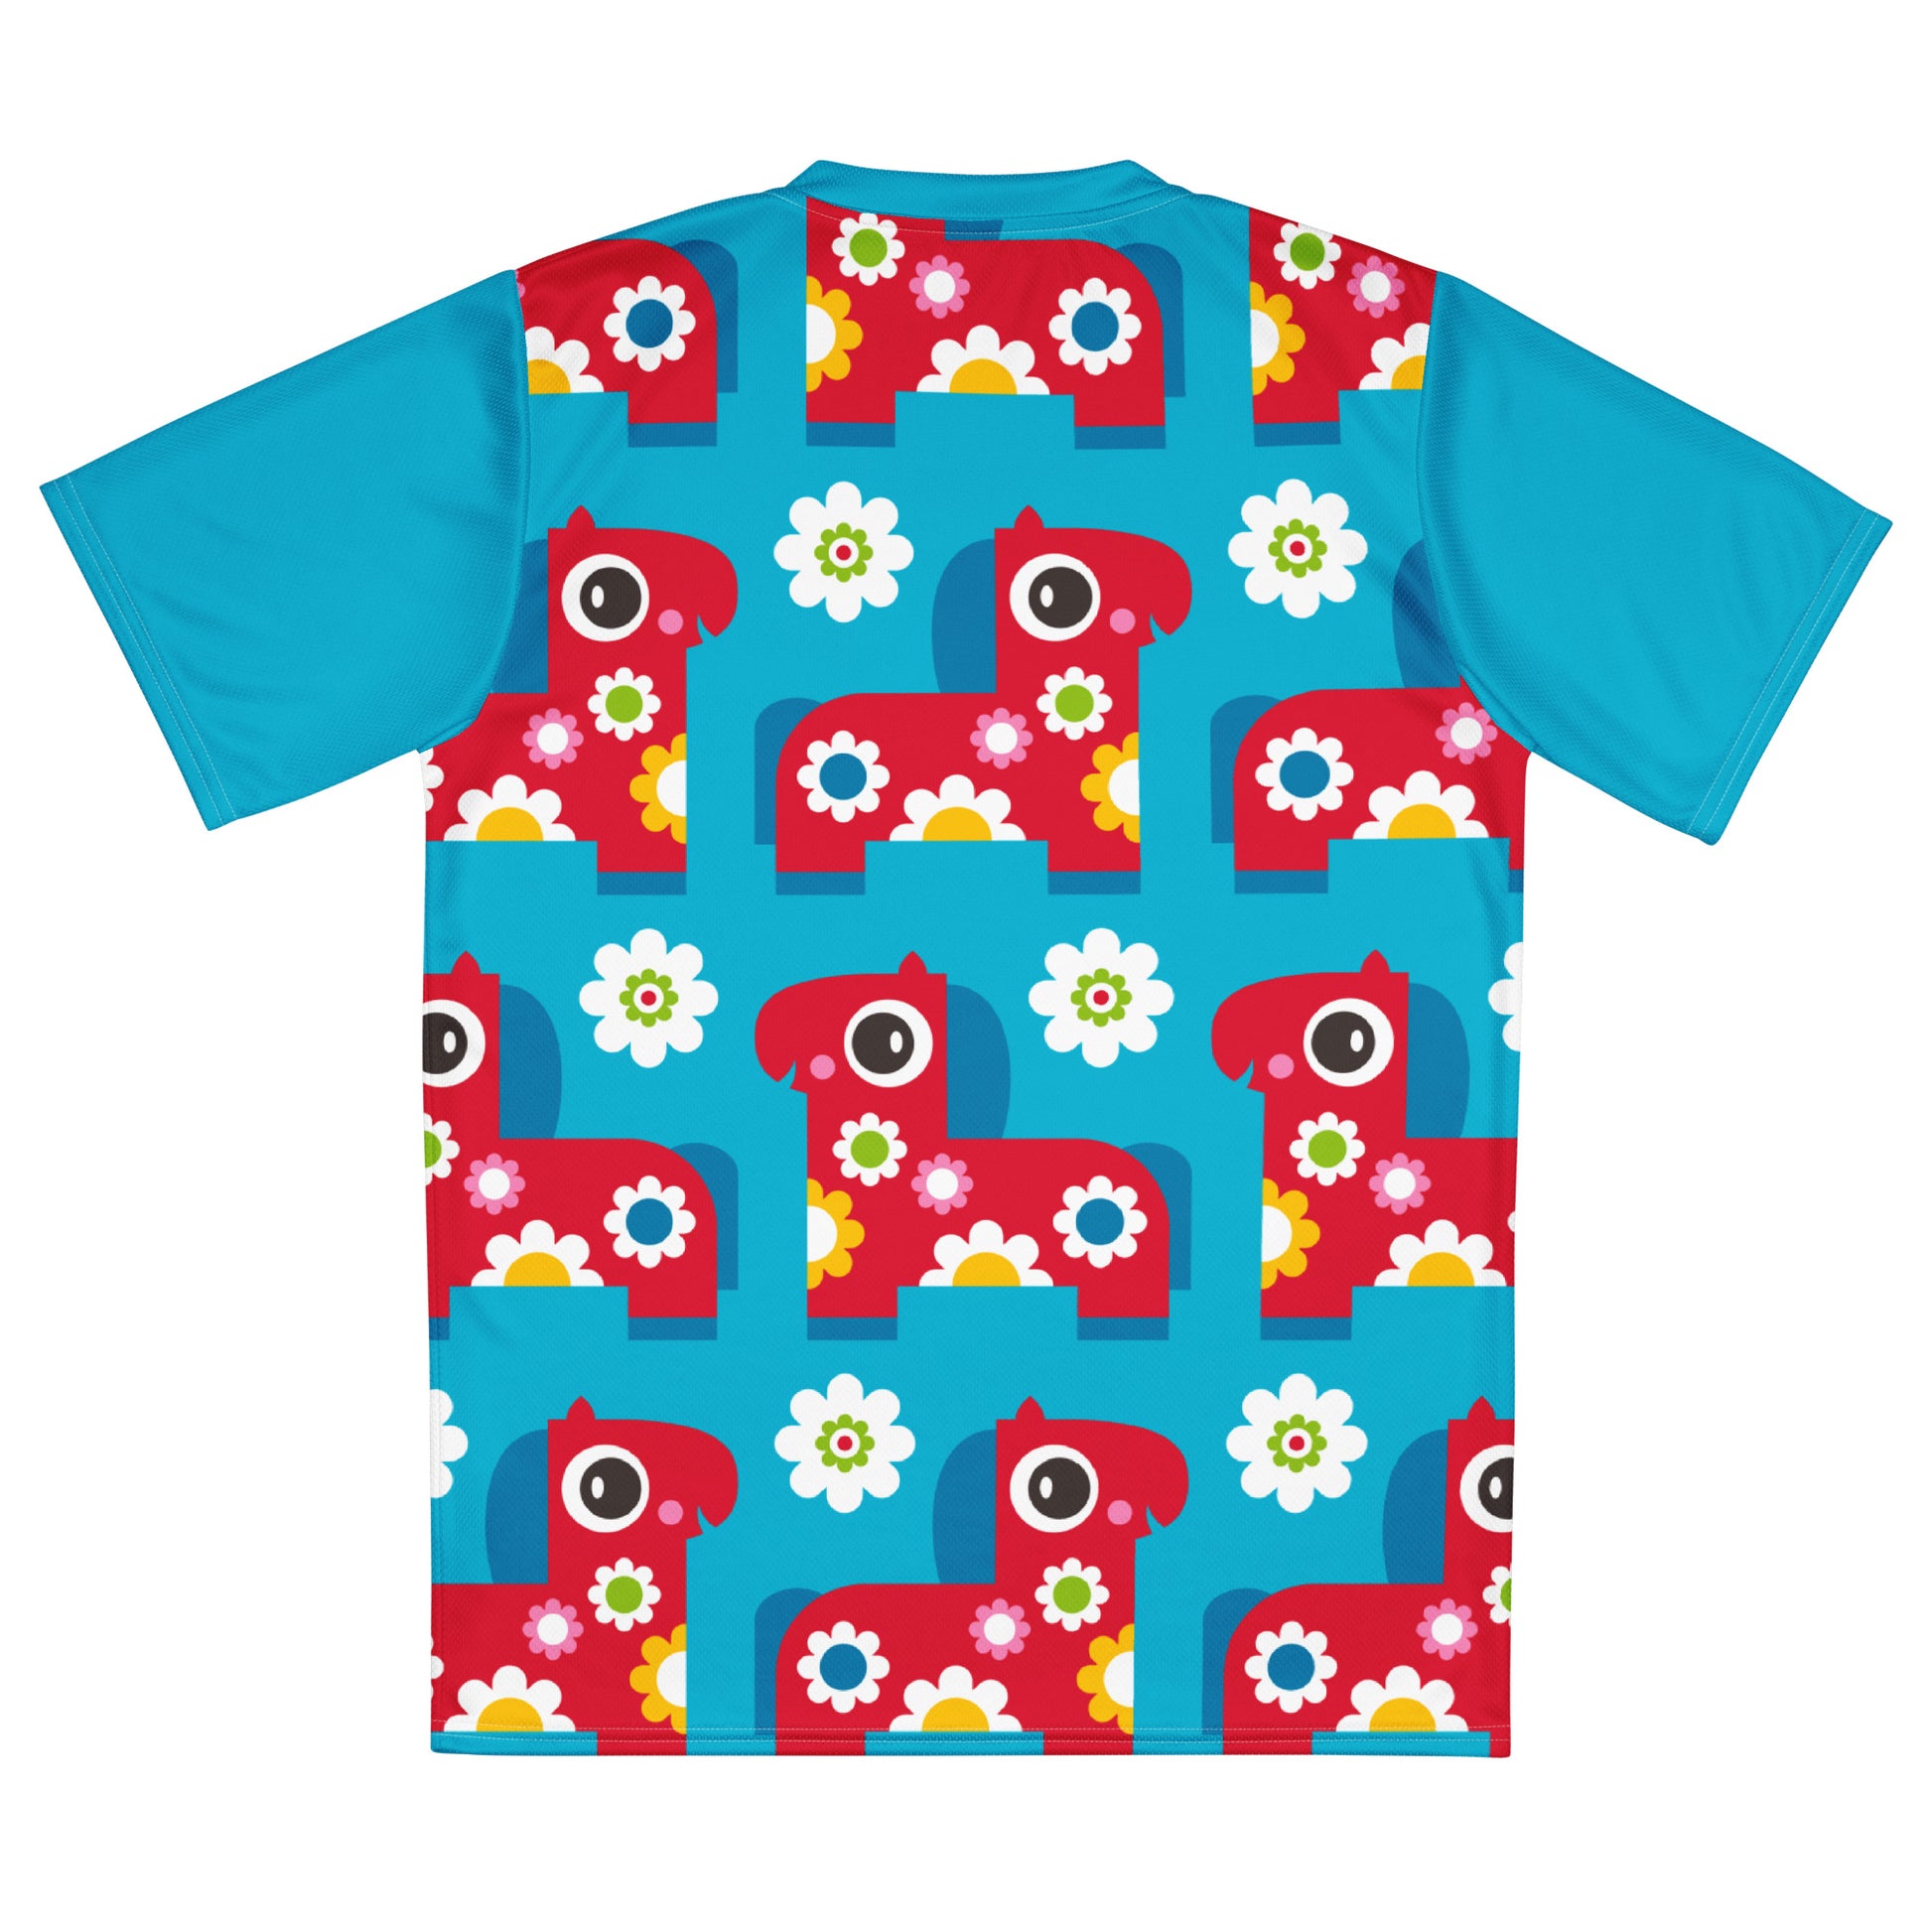 PONY BLOOM turquoise - Recycled unisex sports jersey